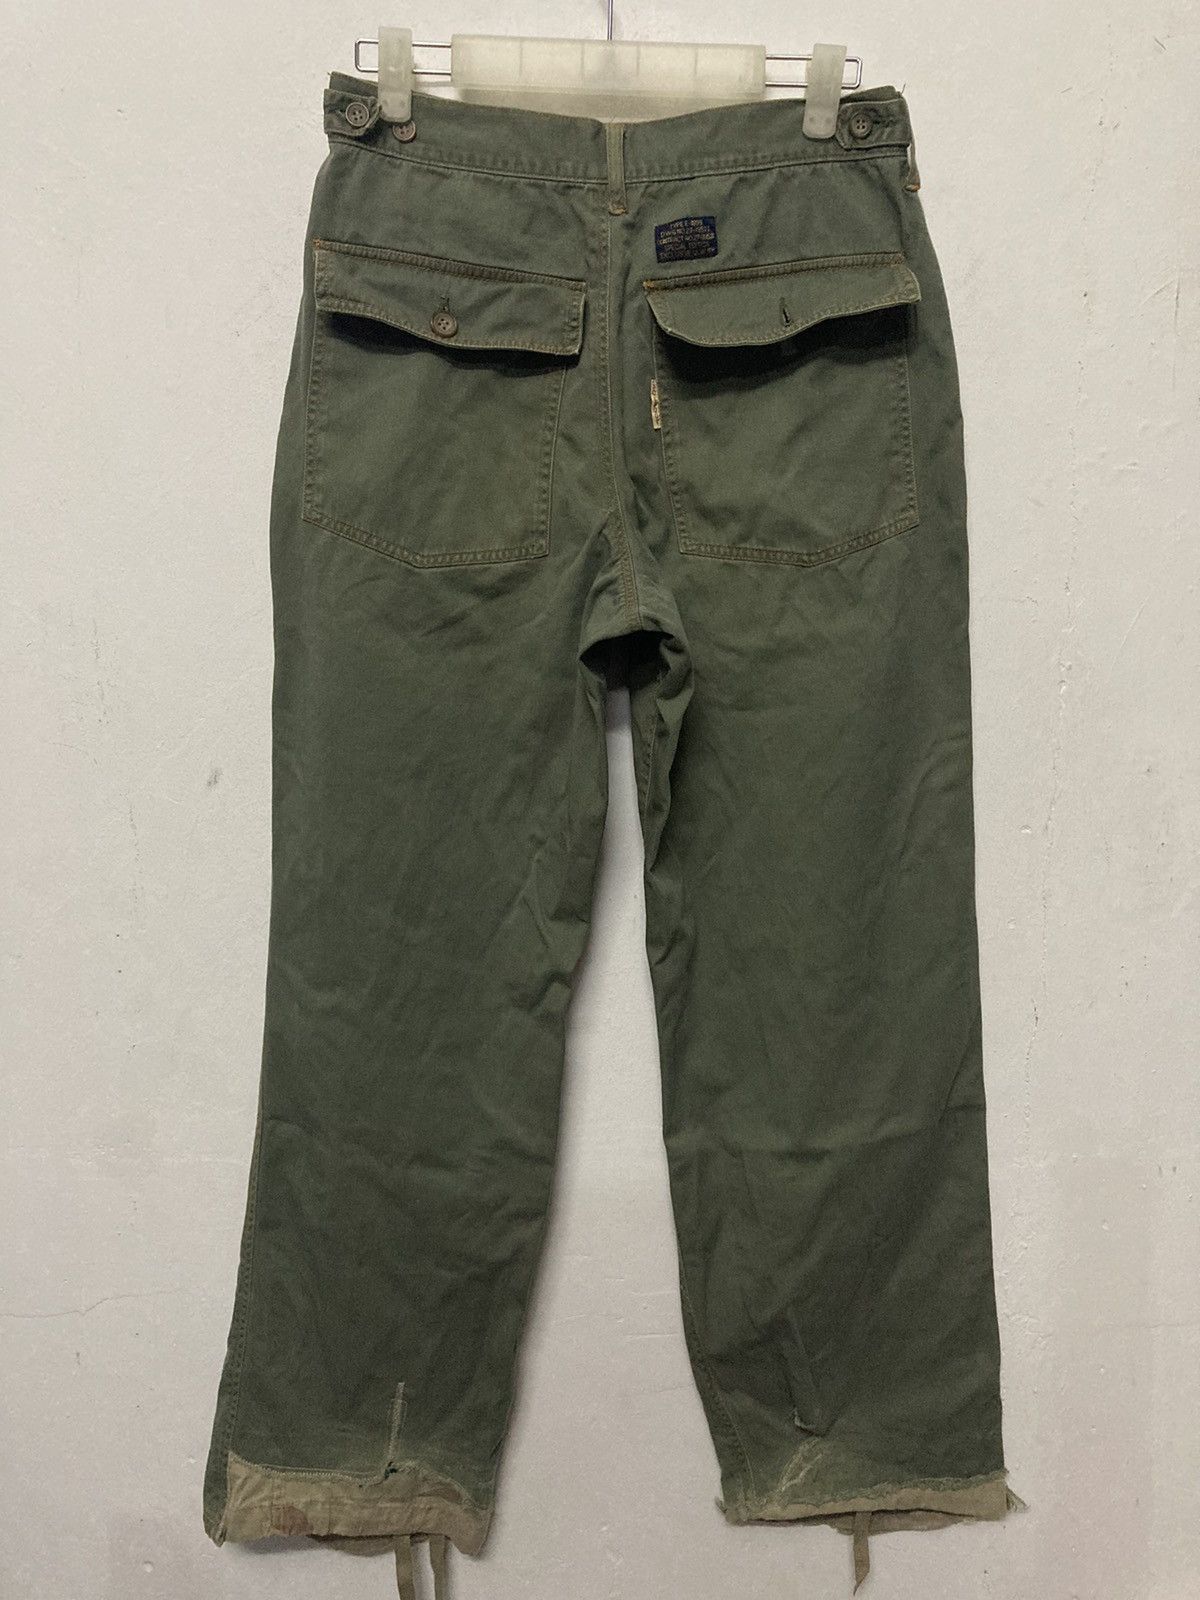 Vintage Soldout Japanese Brand Large Pocket Army Style Pants - 3